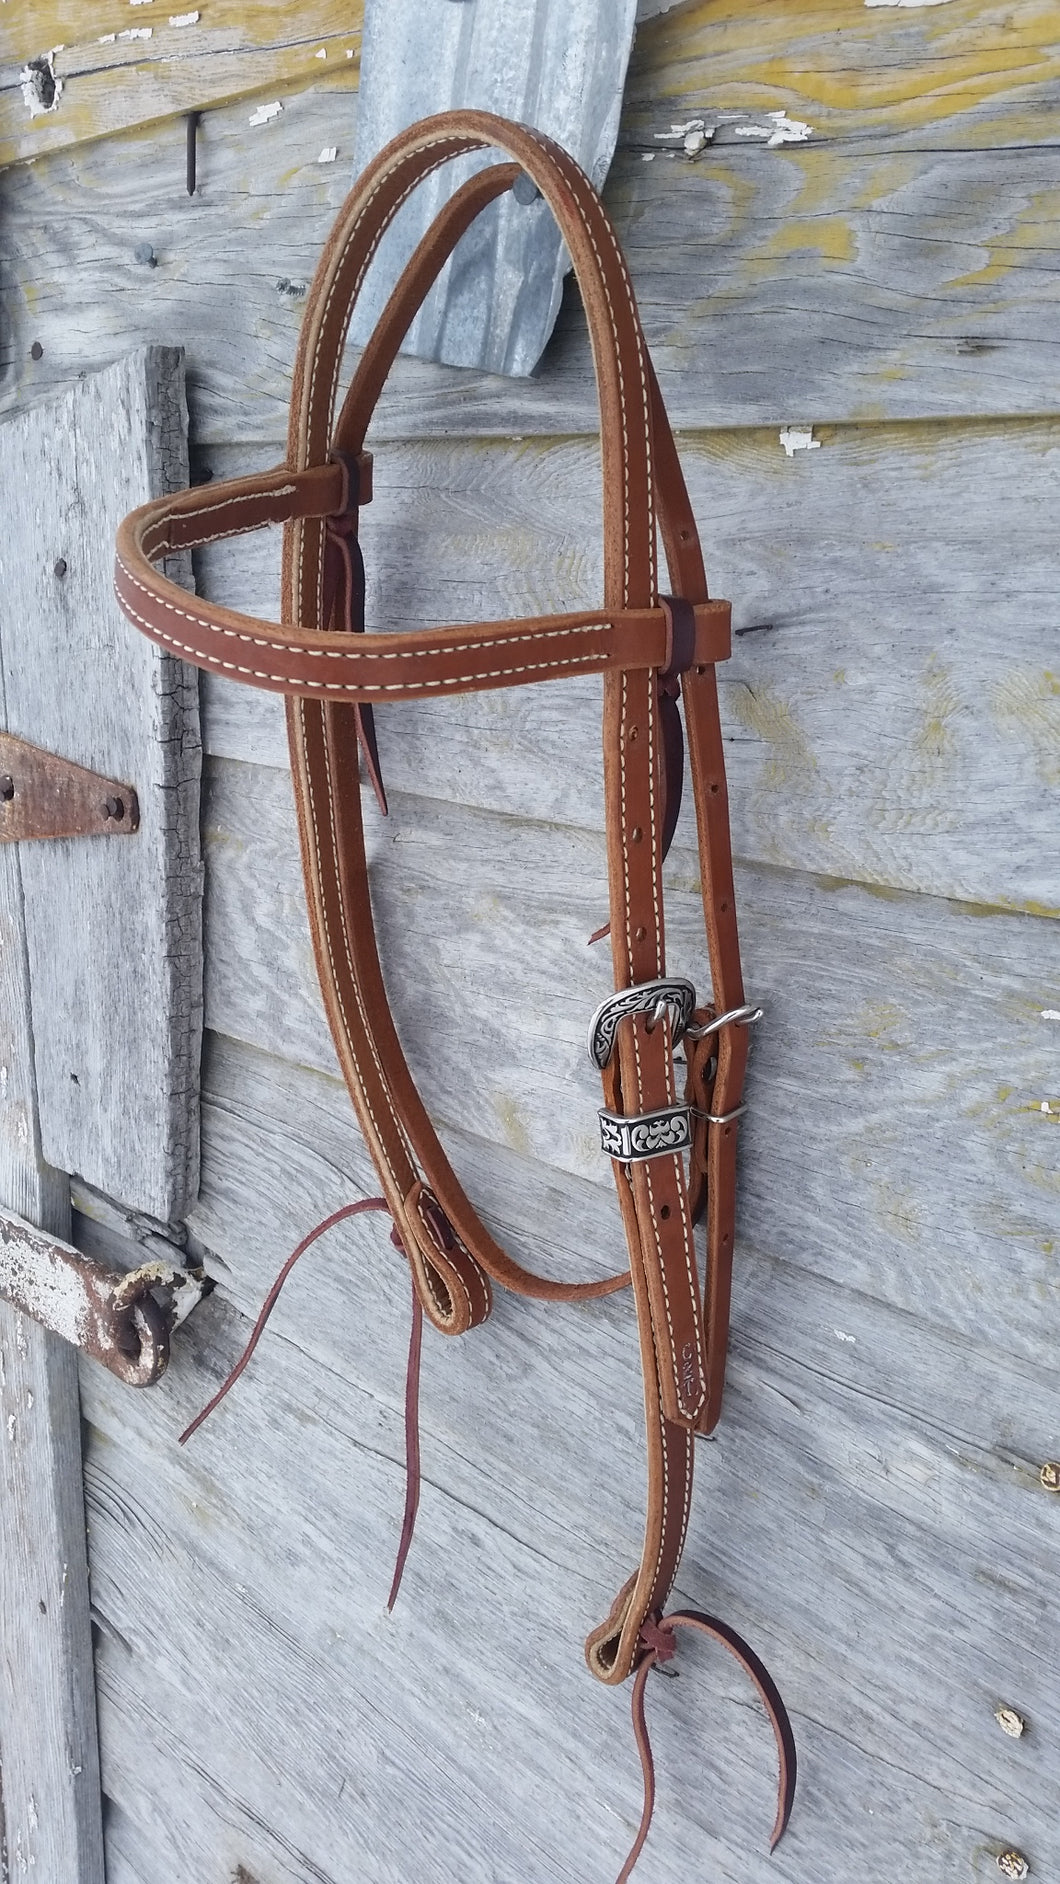 Stitched Leather Browband Headstall